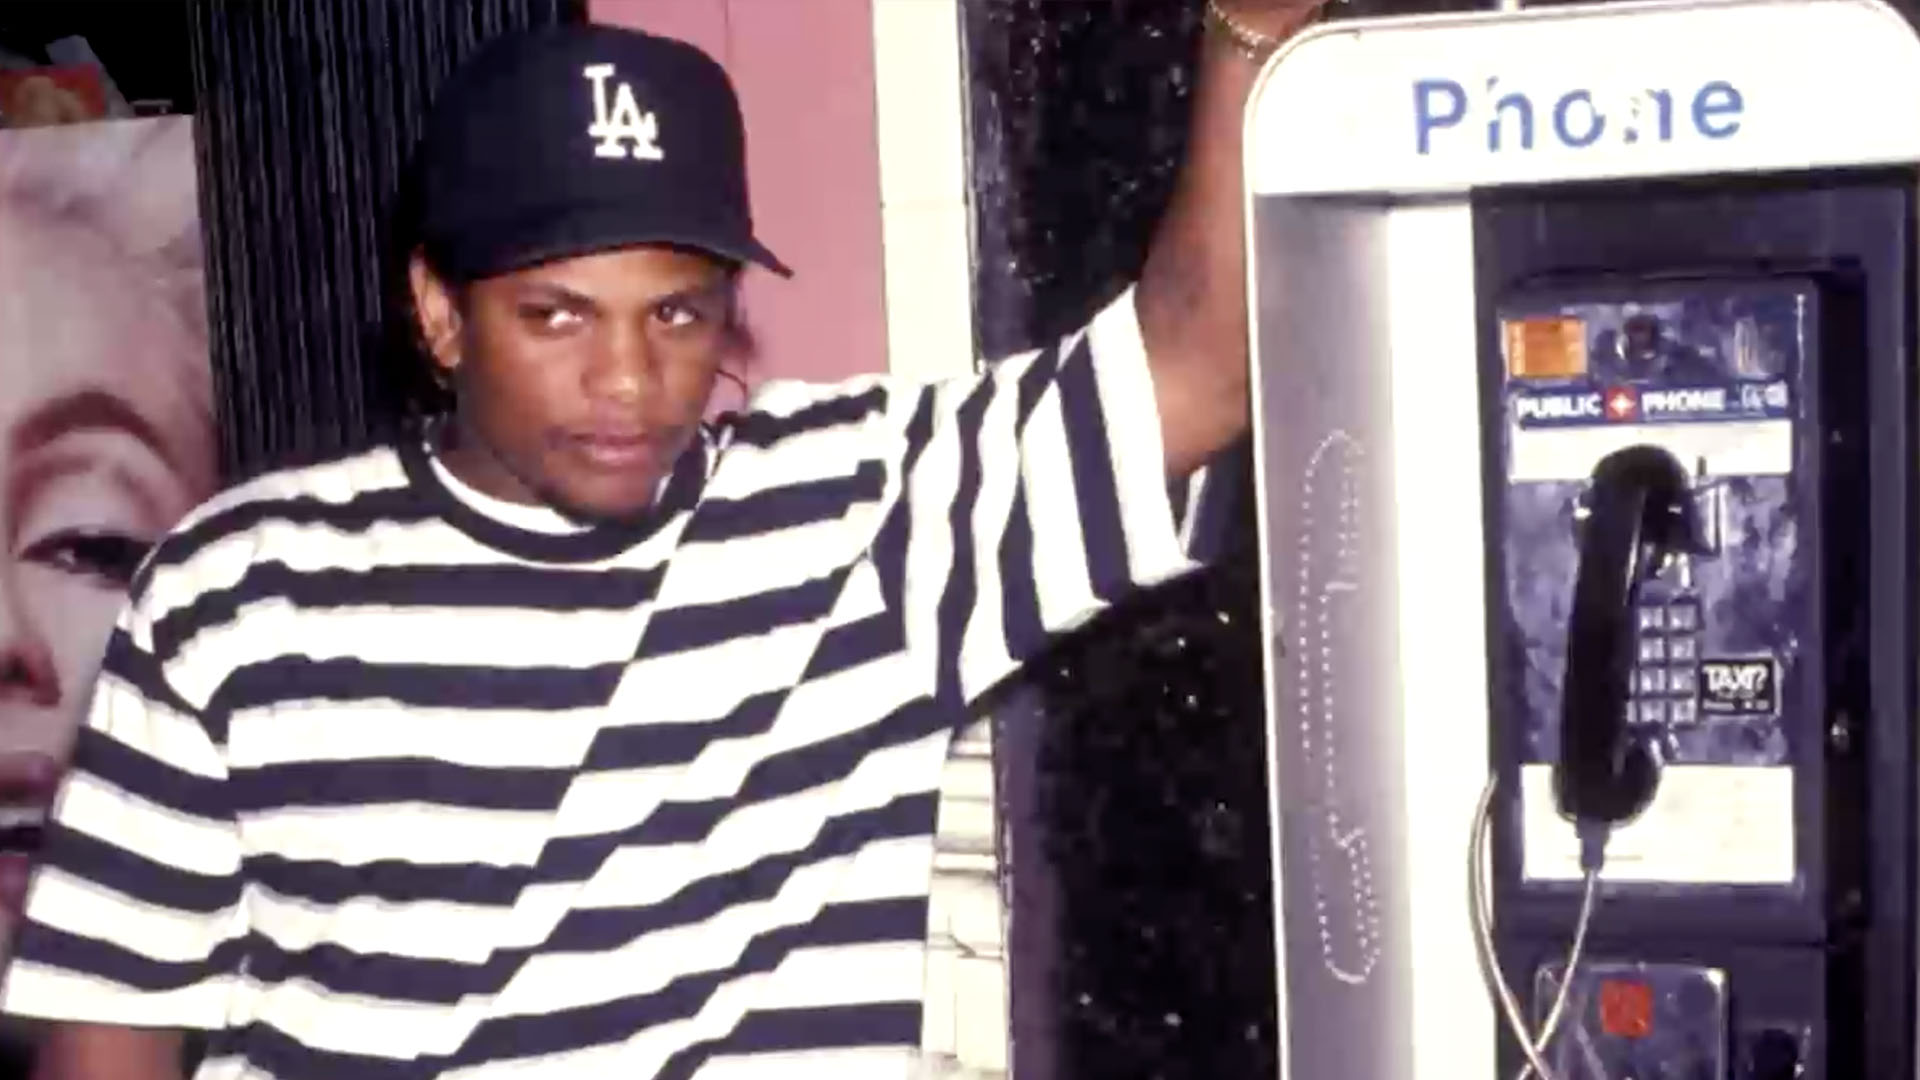 Watch The Mastermind, the Creative, the Prankster! | The Mysterious Death of Eazy-E Video Extras